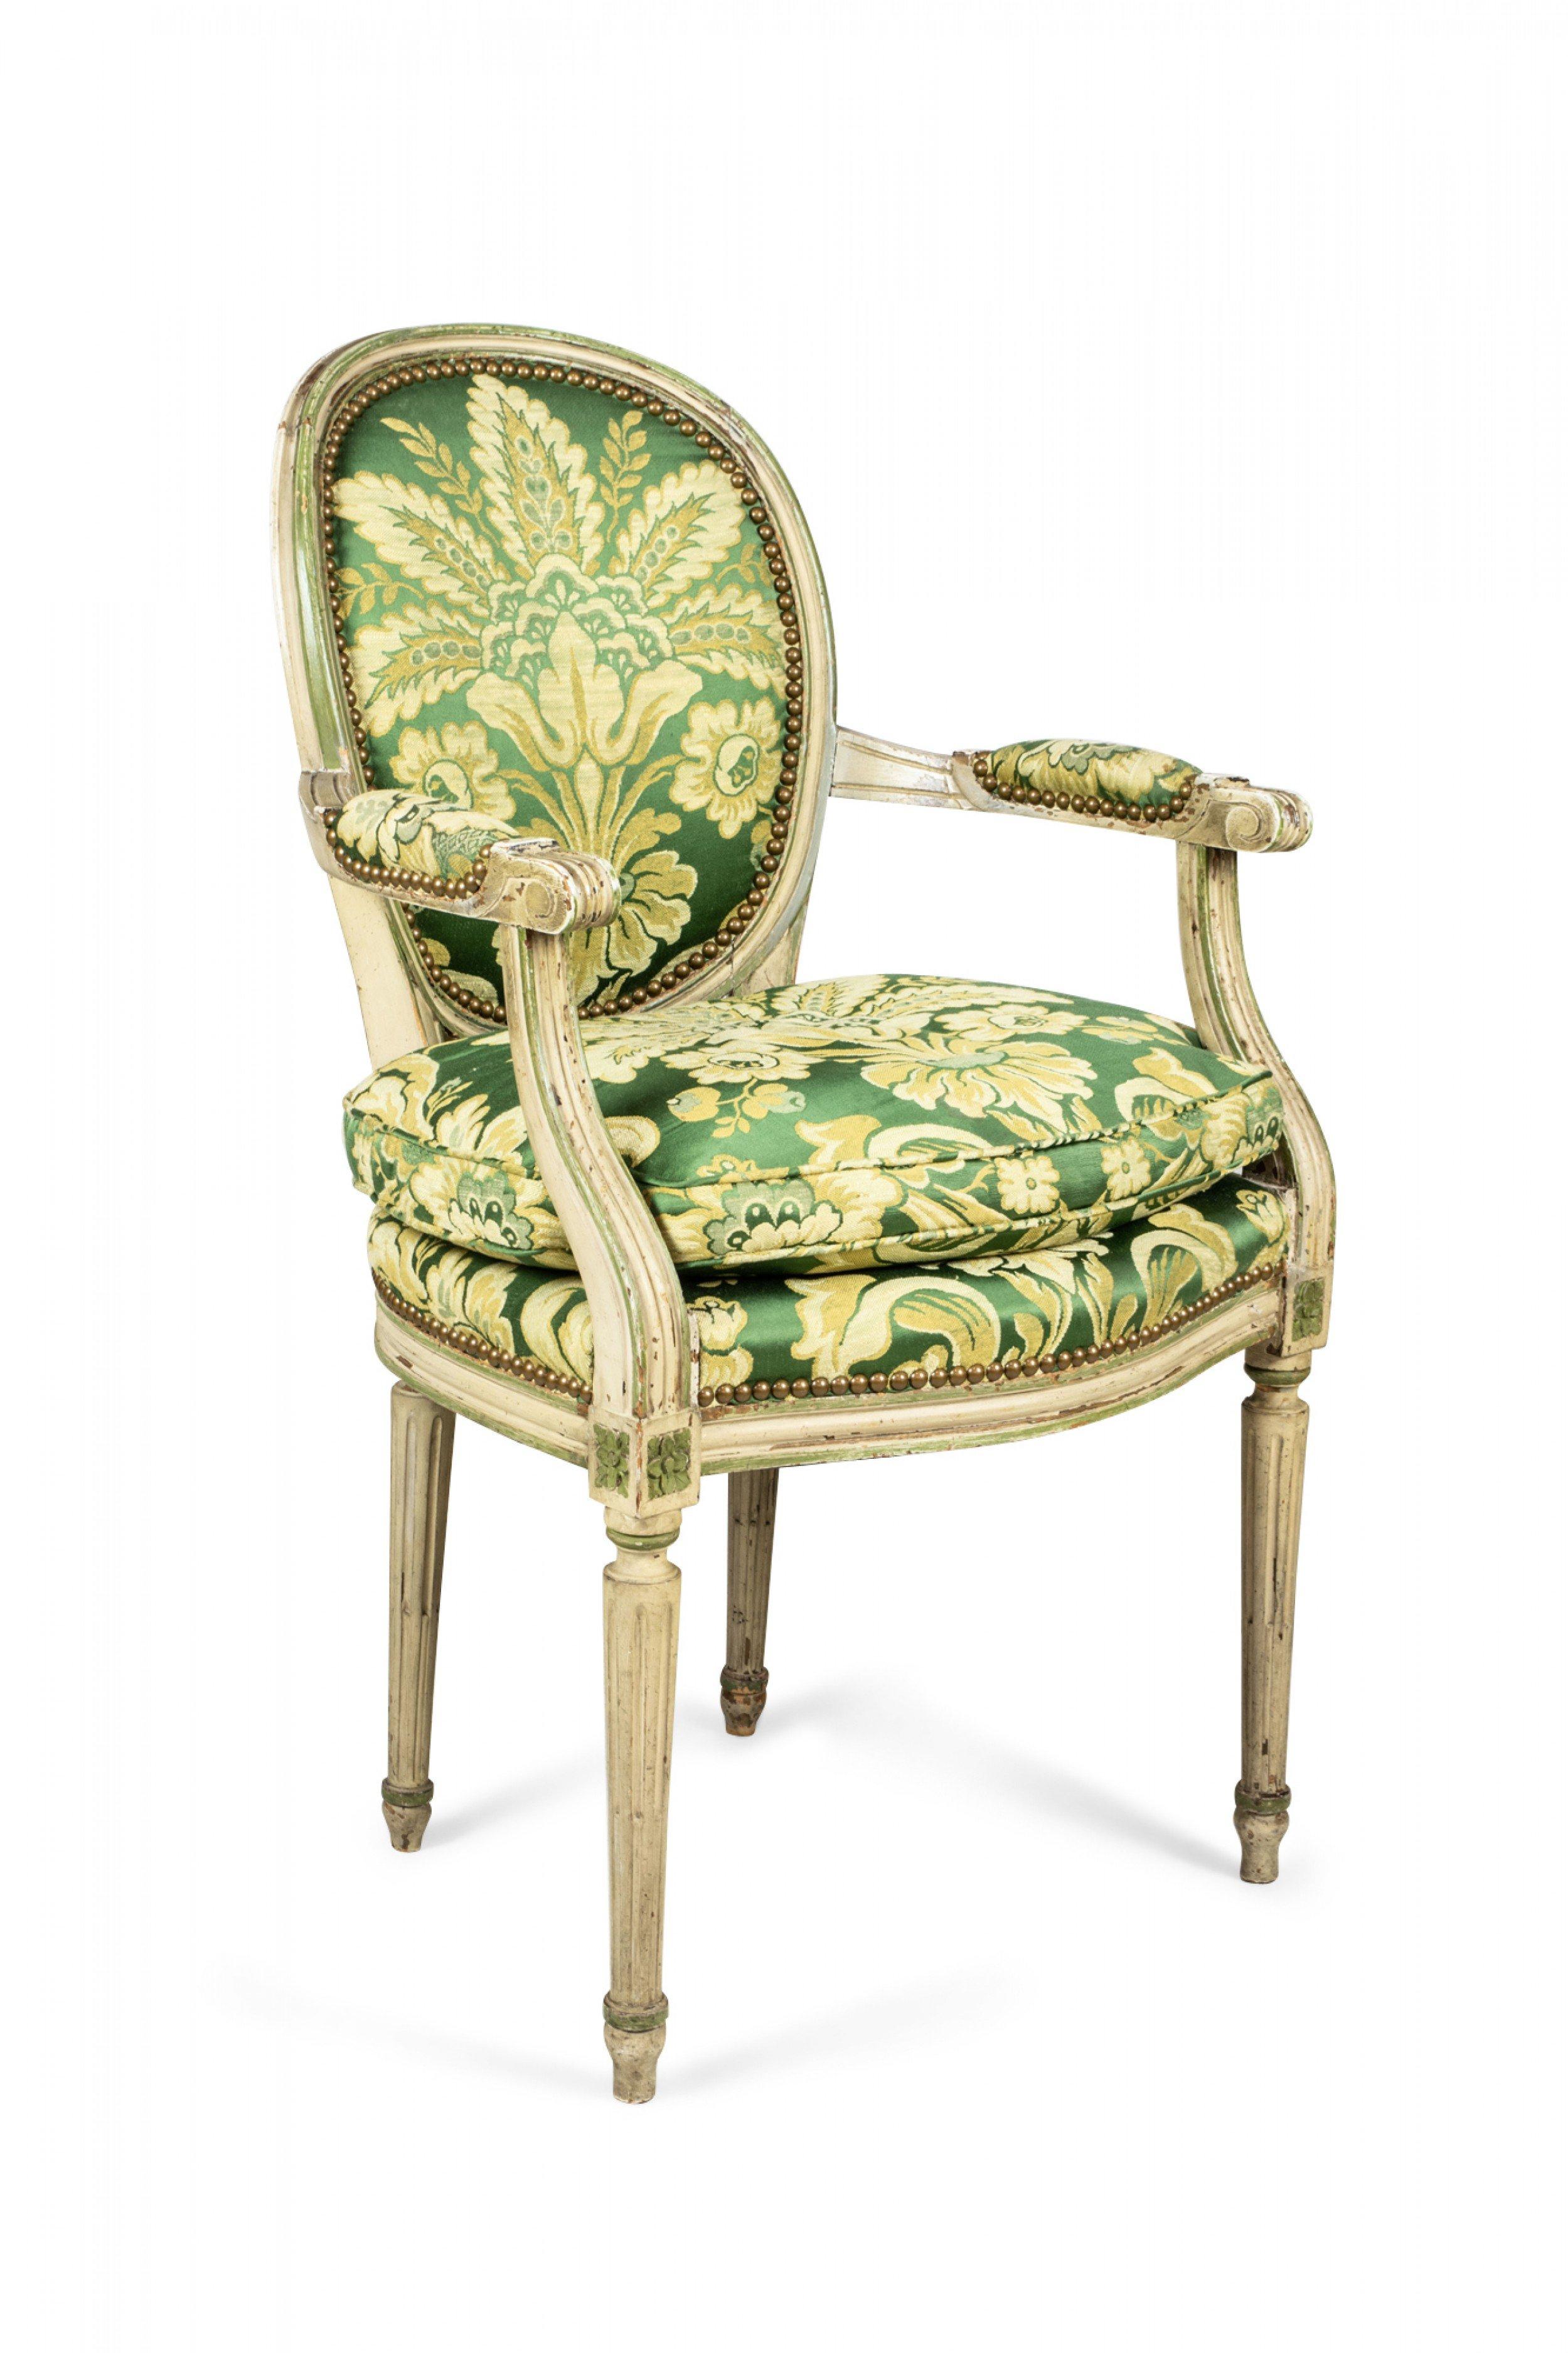 Set of 12 Louis XVI-style (1st half 20th Century) dining chairs with off-white painted frames with green trim and having oval channeled backs, upholstered in green and gold silk damask and raised on 4 tapered and fluted legs (2 of the side chairs